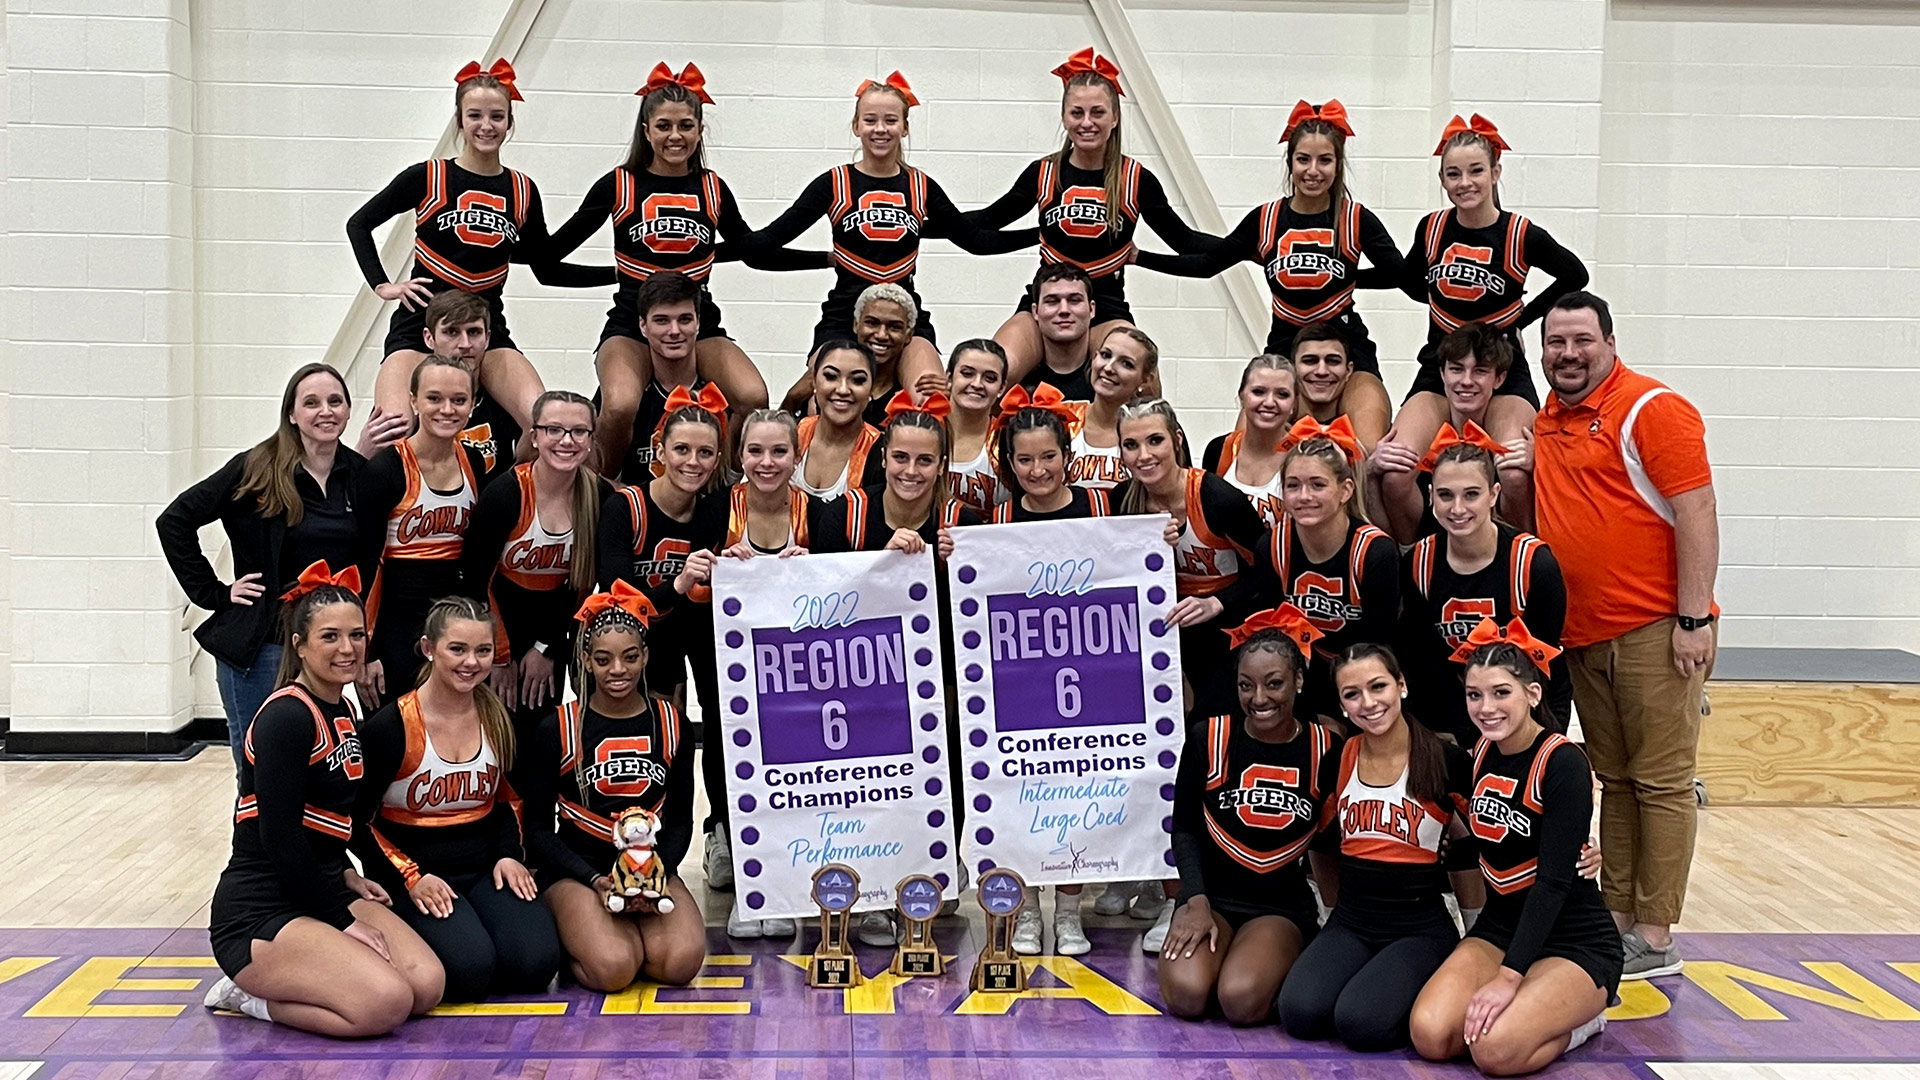 Cowley cheer and dance teams named region champs